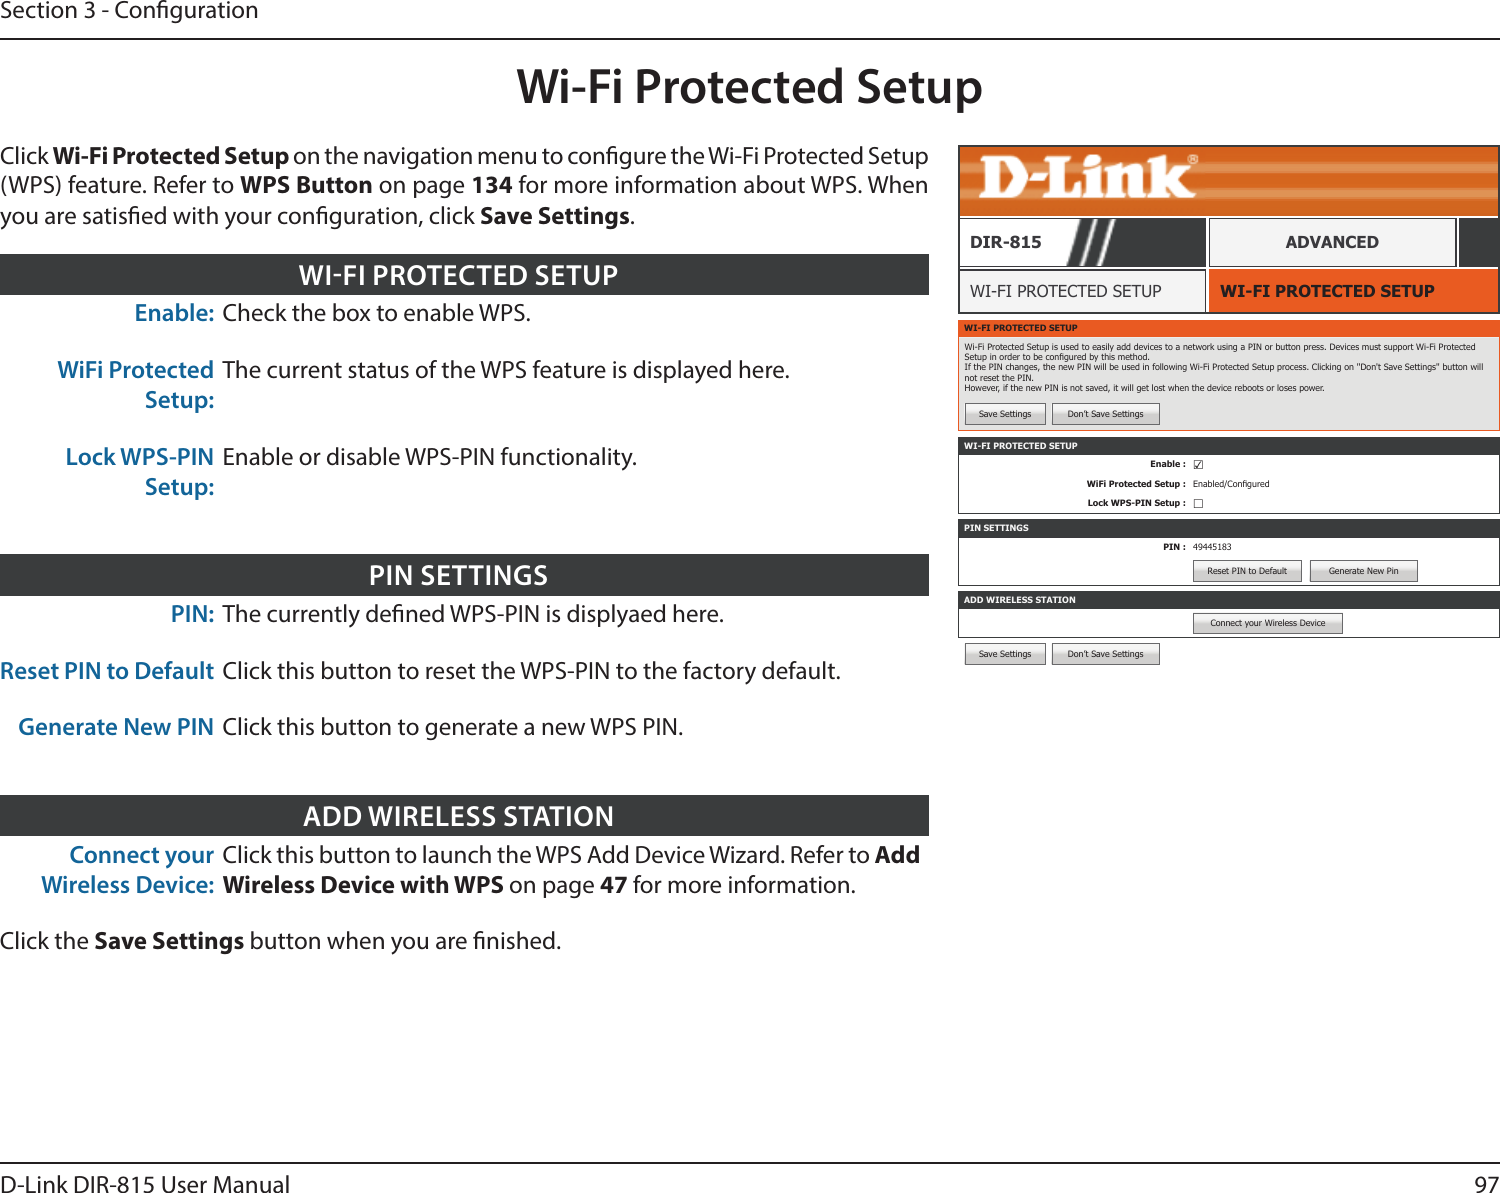 97D-Link DIR-815 User ManualSection 3 - CongurationSave Settings Don’t Save SettingsWi-Fi Protected SetupWI-FI PROTECTED SETUPWI-FI PROTECTED SETUPDIR-815 ADVANCEDEnable: Check the box to enable WPS.WiFi Protected Setup:The current status of the WPS feature is displayed here.Lock WPS-PIN Setup:Enable or disable WPS-PIN functionality.WIFI PROTECTED SETUPPIN: The currently dened WPS-PIN is displyaed here.Reset PIN to Default Click this button to reset the WPS-PIN to the factory default.Generate New PIN Click this button to generate a new WPS PIN.PIN SETTINGSConnect your Wireless Device:Click this button to launch the WPS Add Device Wizard. Refer to Add Wireless Device with WPS on page 47 for more information.Click the Save Settings button when you are nished.ADD WIRELESS STATIONWI-FI PROTECTED SETUPWi-Fi Protected Setup is used to easily add devices to a network using a PIN or button press. Devices must support Wi-Fi Protected Setup in order to be congured by this method. If the PIN changes, the new PIN will be used in following Wi-Fi Protected Setup process. Clicking on &apos;&apos;Don&apos;t Save Settings&apos;&apos; button will not reset the PIN. However, if the new PIN is not saved, it will get lost when the device reboots or loses power.Save Settings Don’t Save SettingsPIN SETTINGSPIN : 49445183Reset PIN to Default Generate New PinADD WIRELESS STATIONConnect your Wireless DeviceWI-FI PROTECTED SETUPEnable : ☑WiFi Protected Setup : Enabled/ConguredLock WPS-PIN Setup : ☐Click Wi-Fi Protected Setup on the navigation menu to congure the Wi-Fi Protected Setup (WPS) feature. Refer to WPS Button on page 134 for more information about WPS. When you are satised with your conguration, click Save Settings.